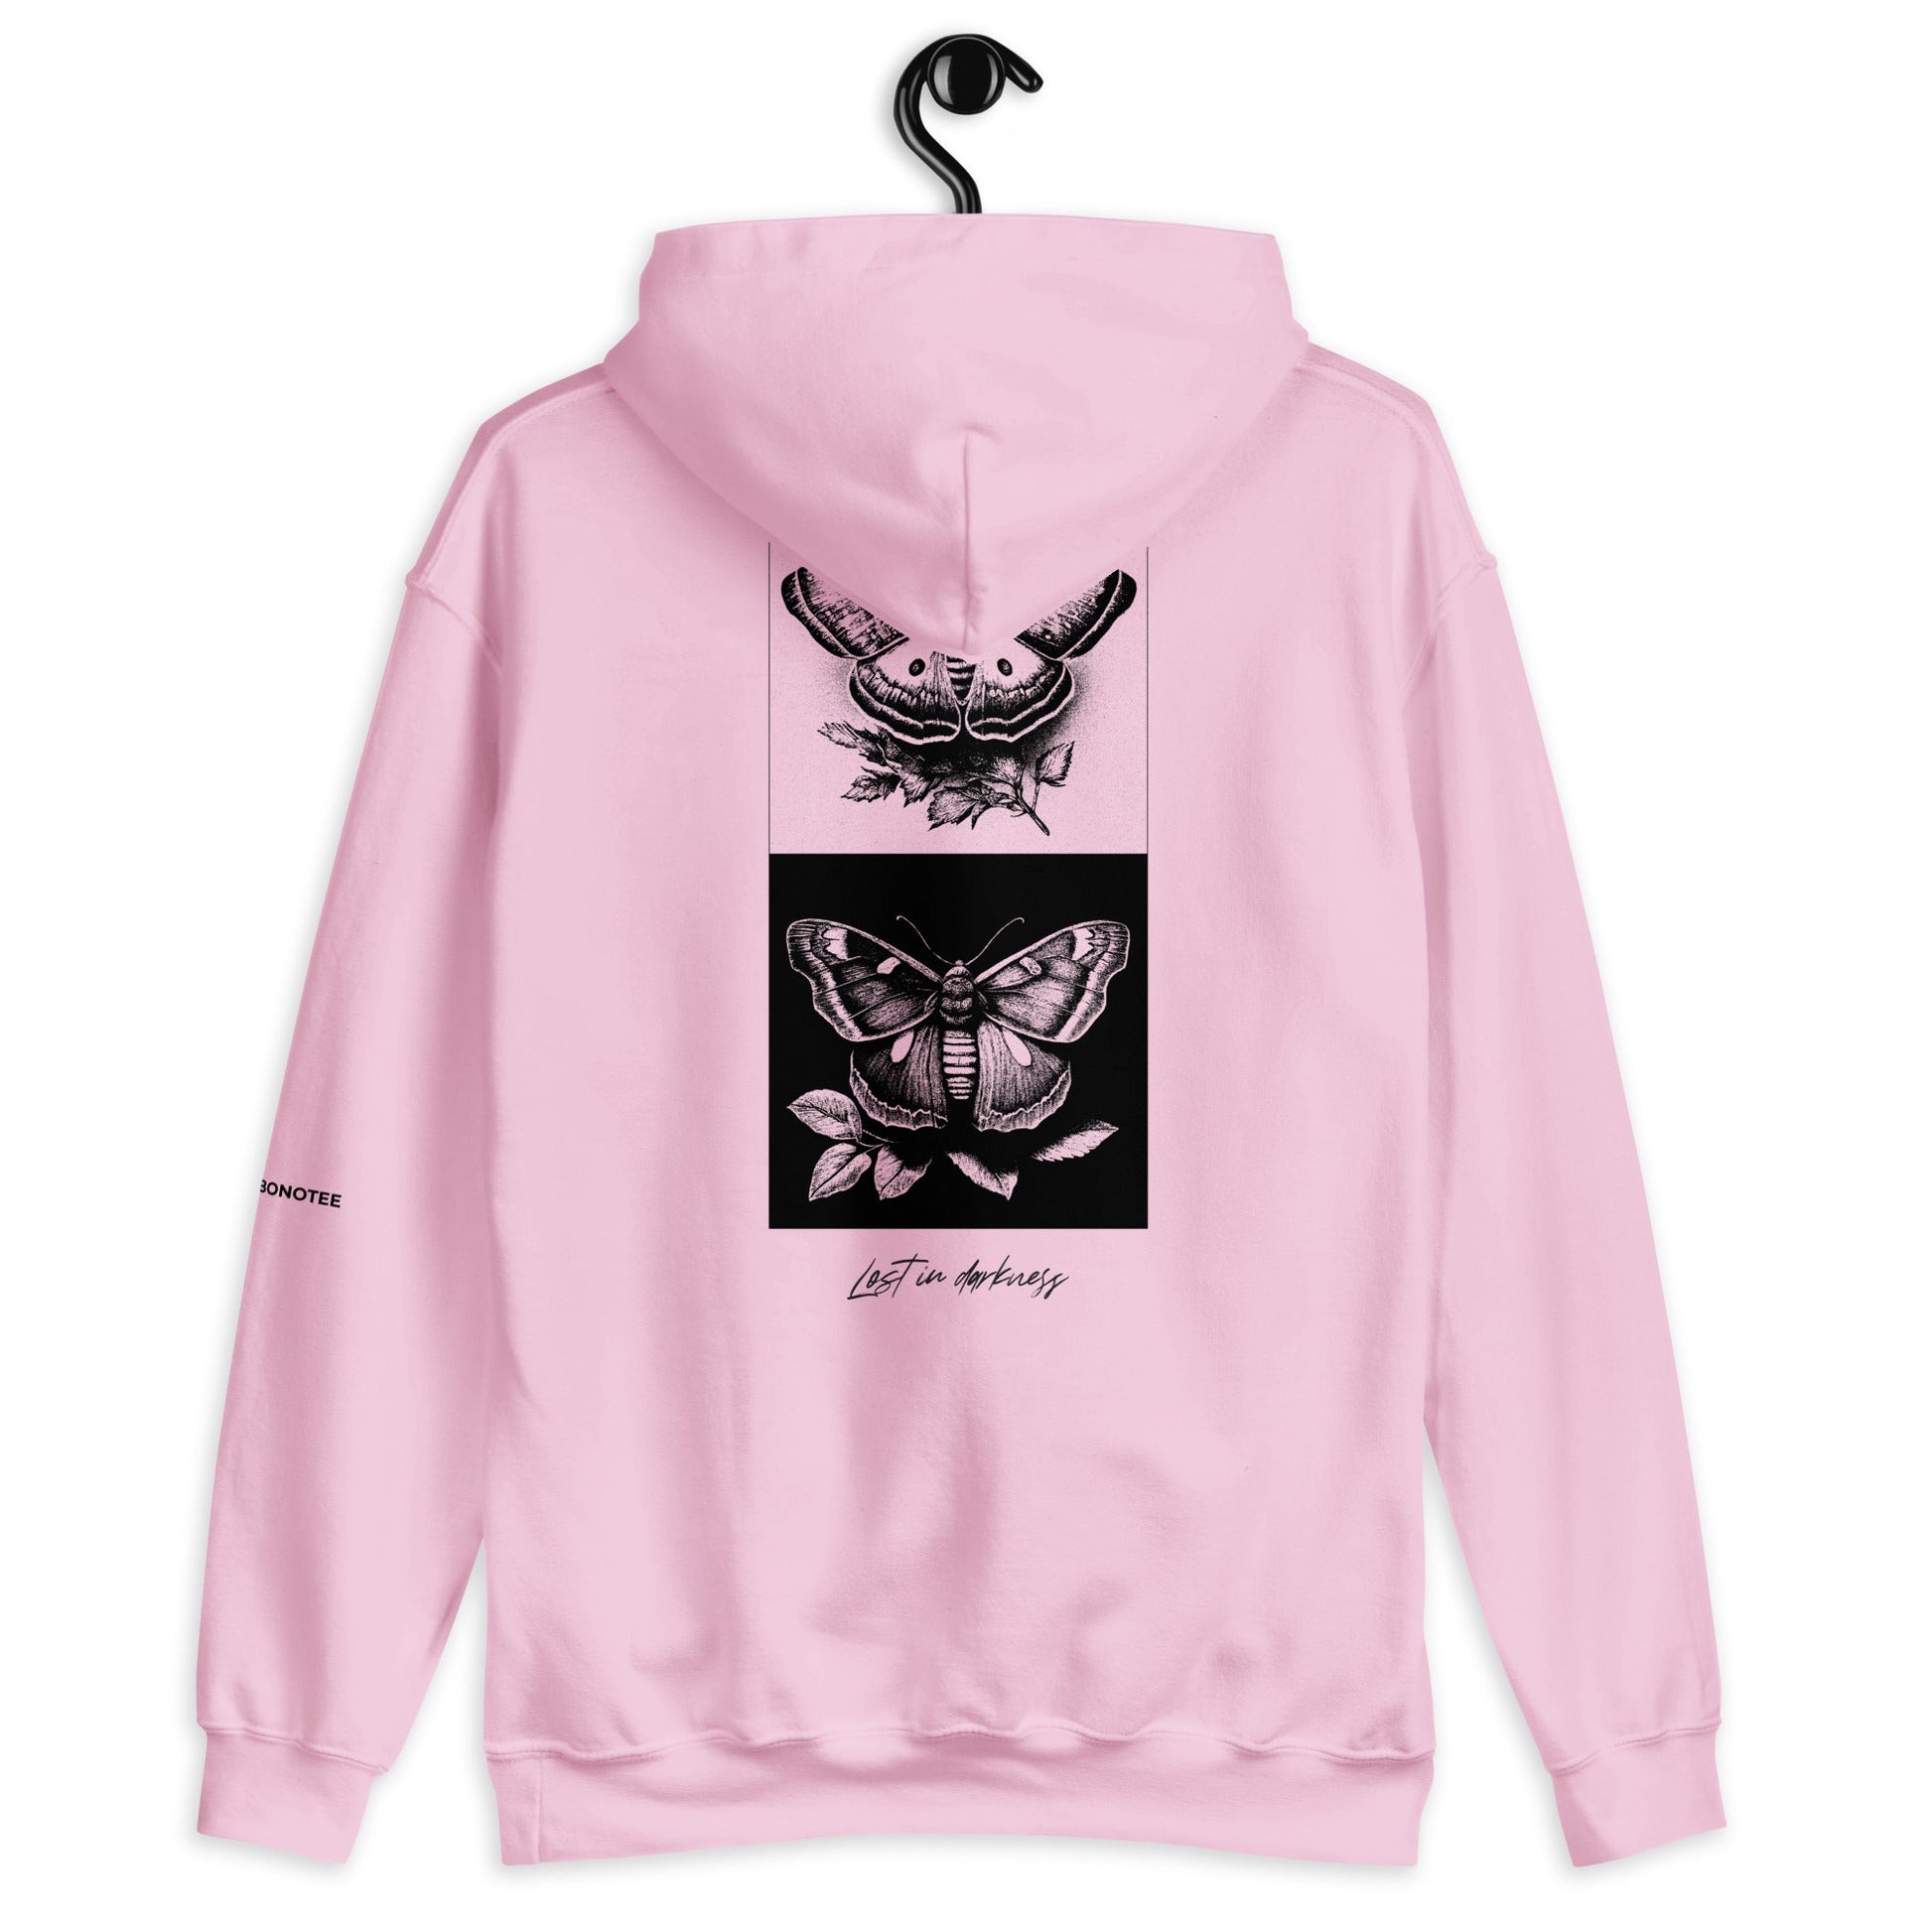 LOST IN DARKNESS Hoodie - Bonotee